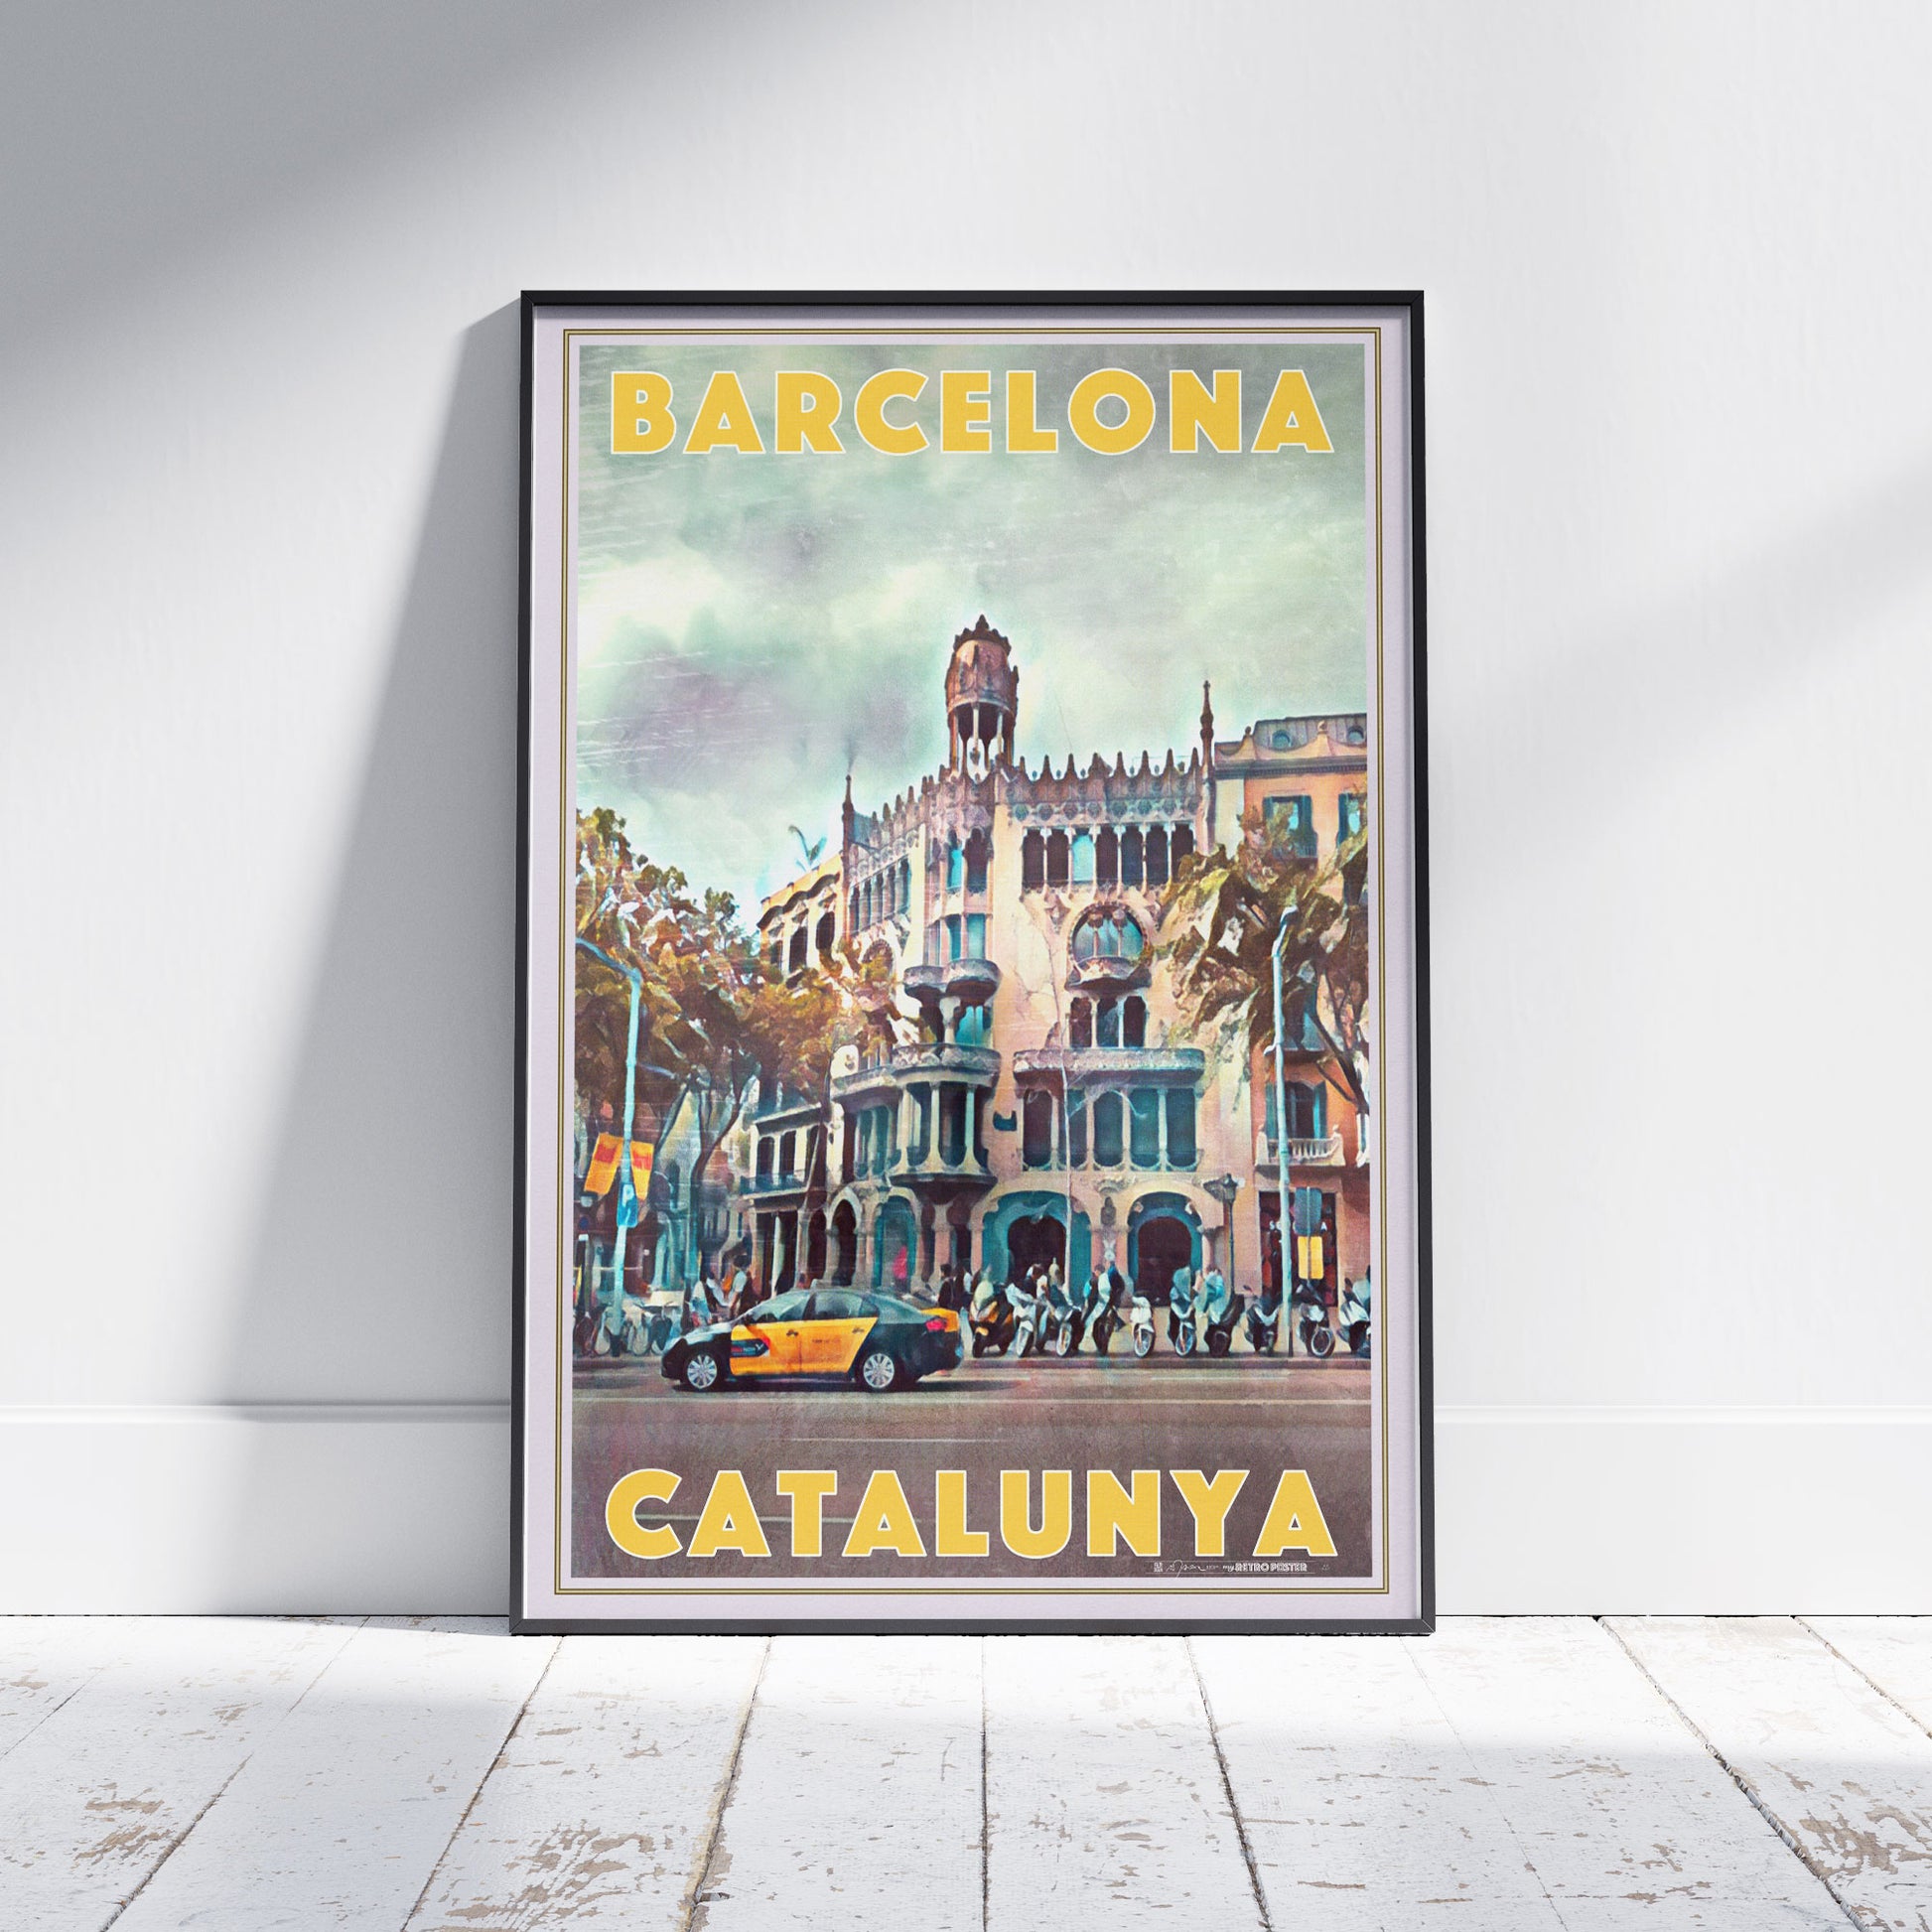 Limited Edition Casa Lleó Morera Barcelona Poster by Alecse, Yellow titles version, Framed on White Wooden Floor